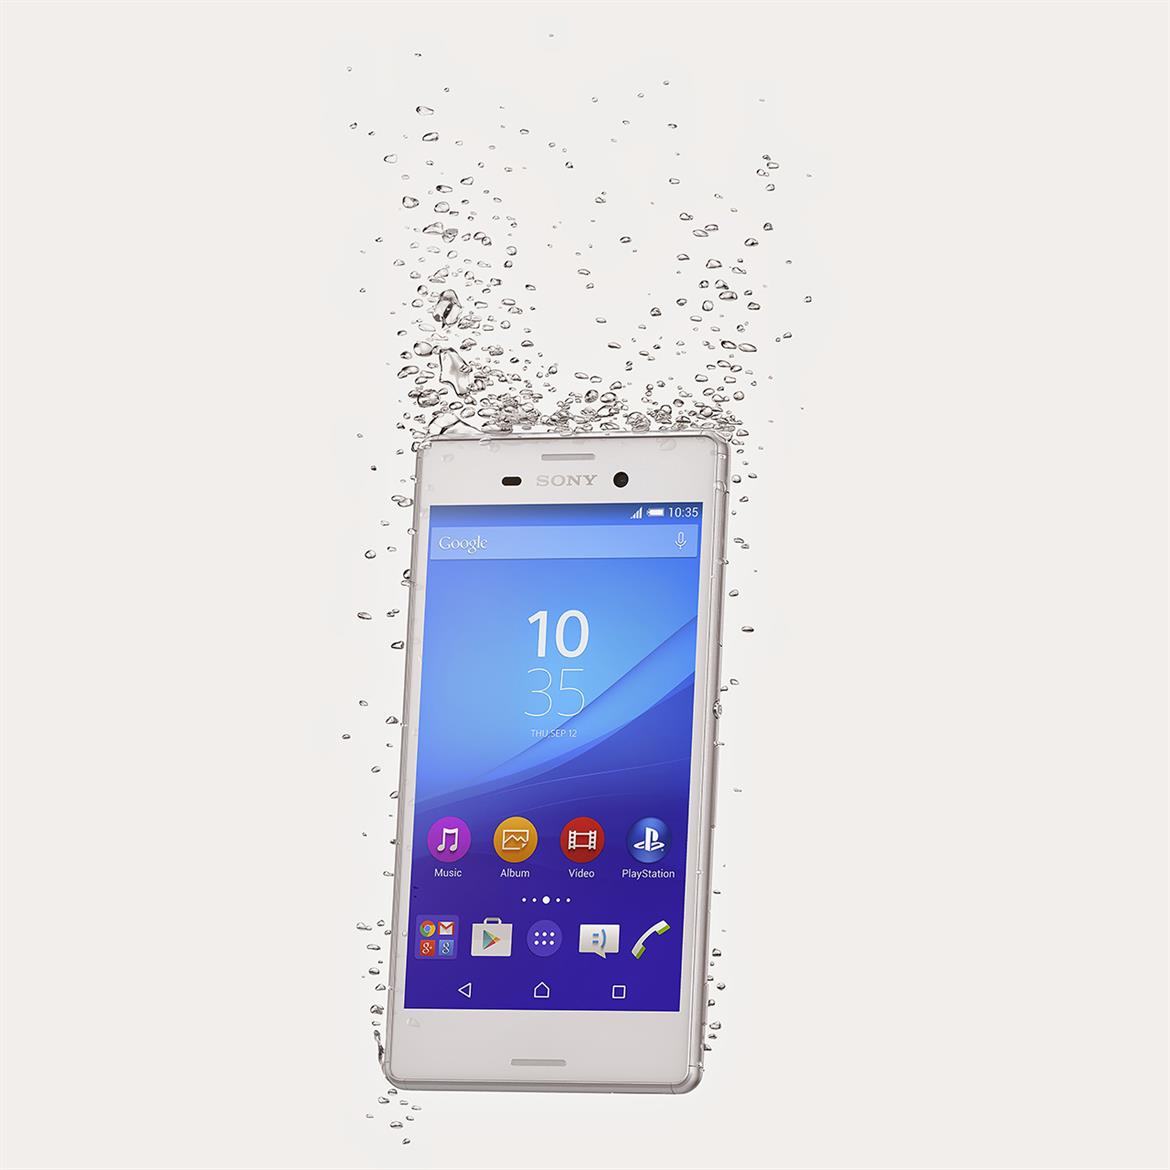 Sony Makes A Splash With Mid-Range Xperia M4 Aqua Smartphone And 10-Inch Z4 Tablet